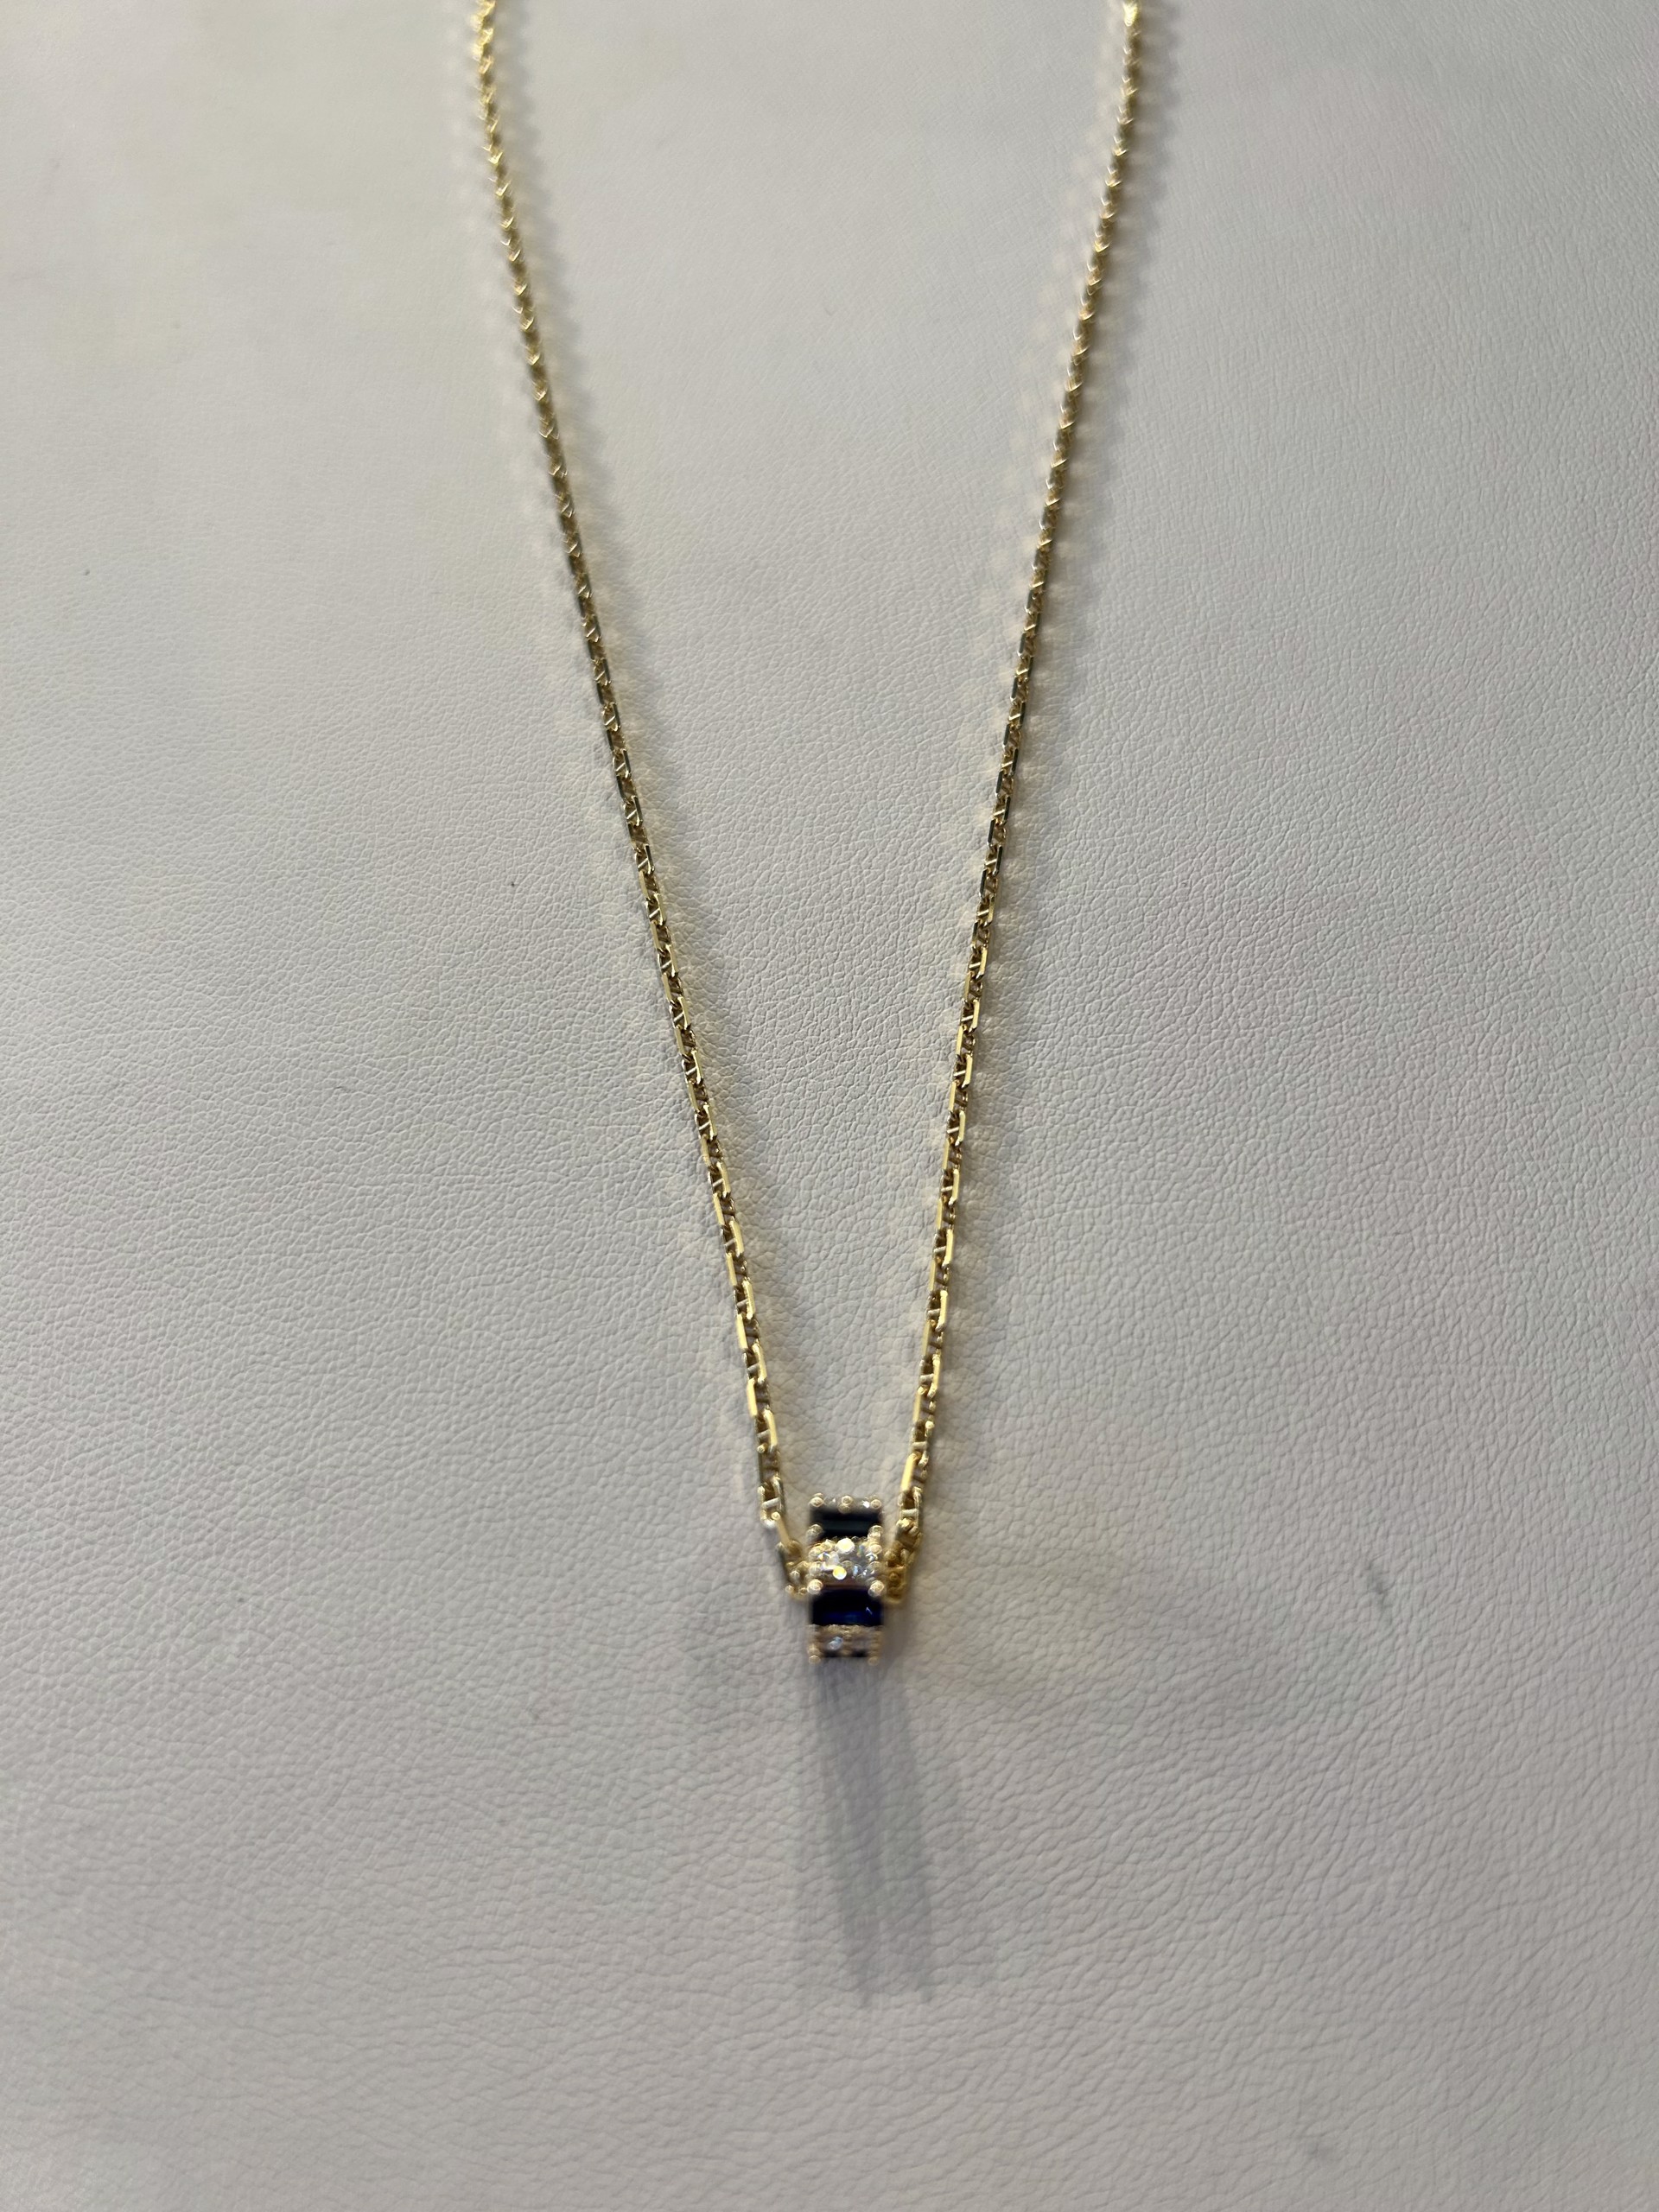 KB-N27 14 k gold necklace with a gold, diamond, and sapphire slide pendant by Karen Birchmier